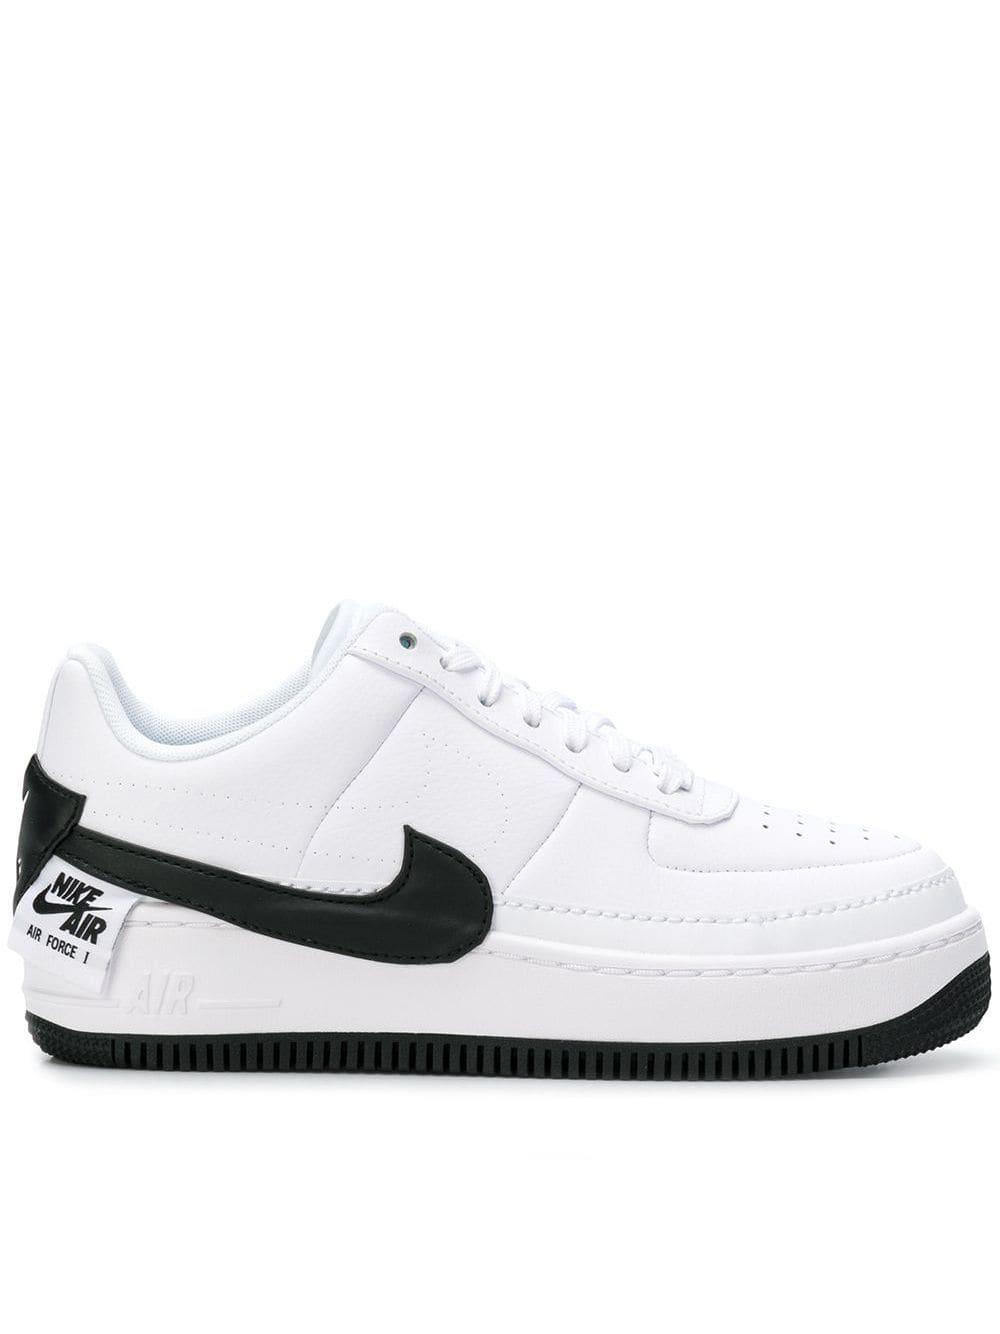 nike air force 1 jester canada 